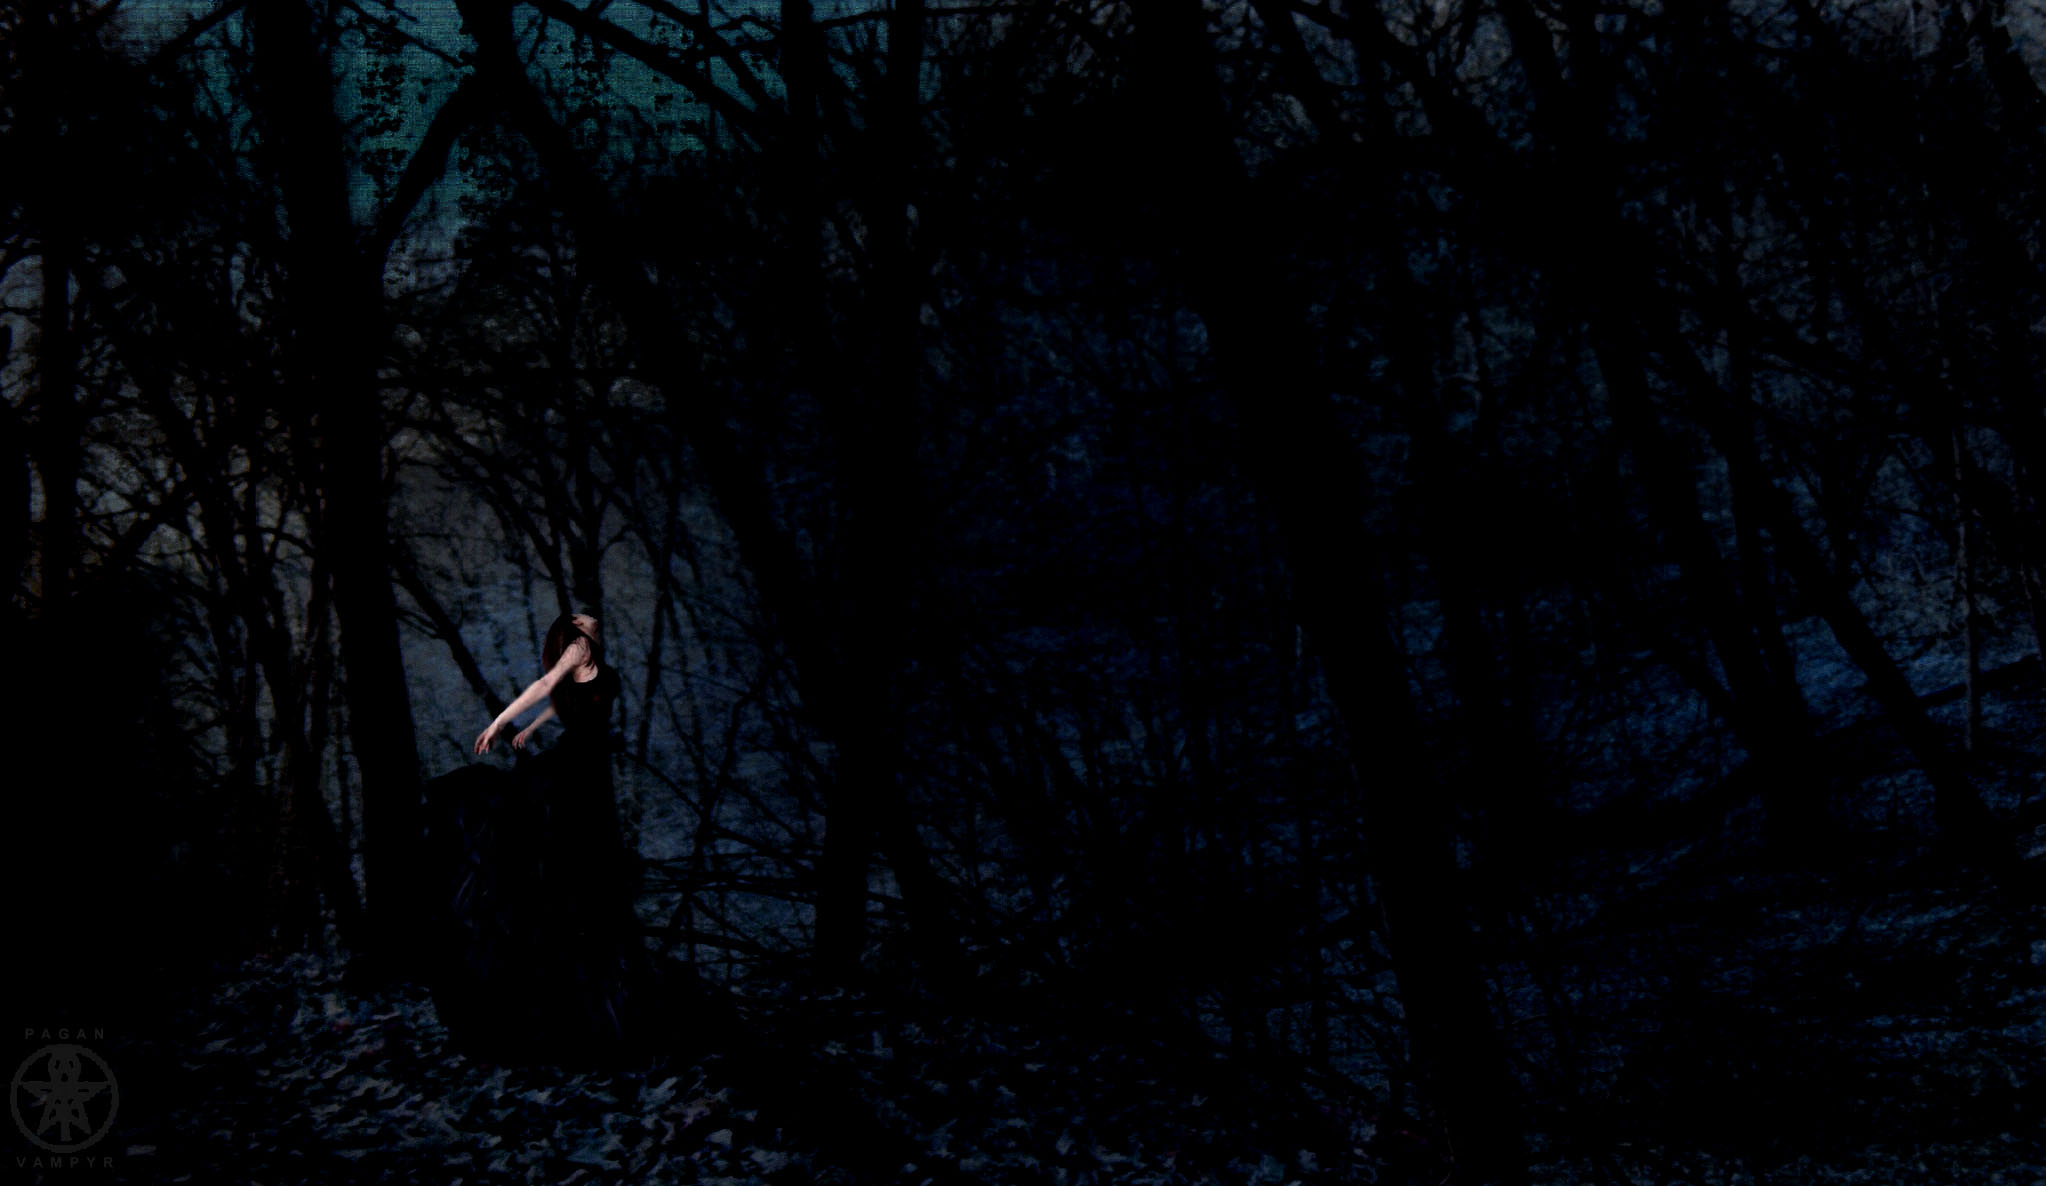 Gothic Girl in the Woods wallpaper from Gothic Girls wallpapers